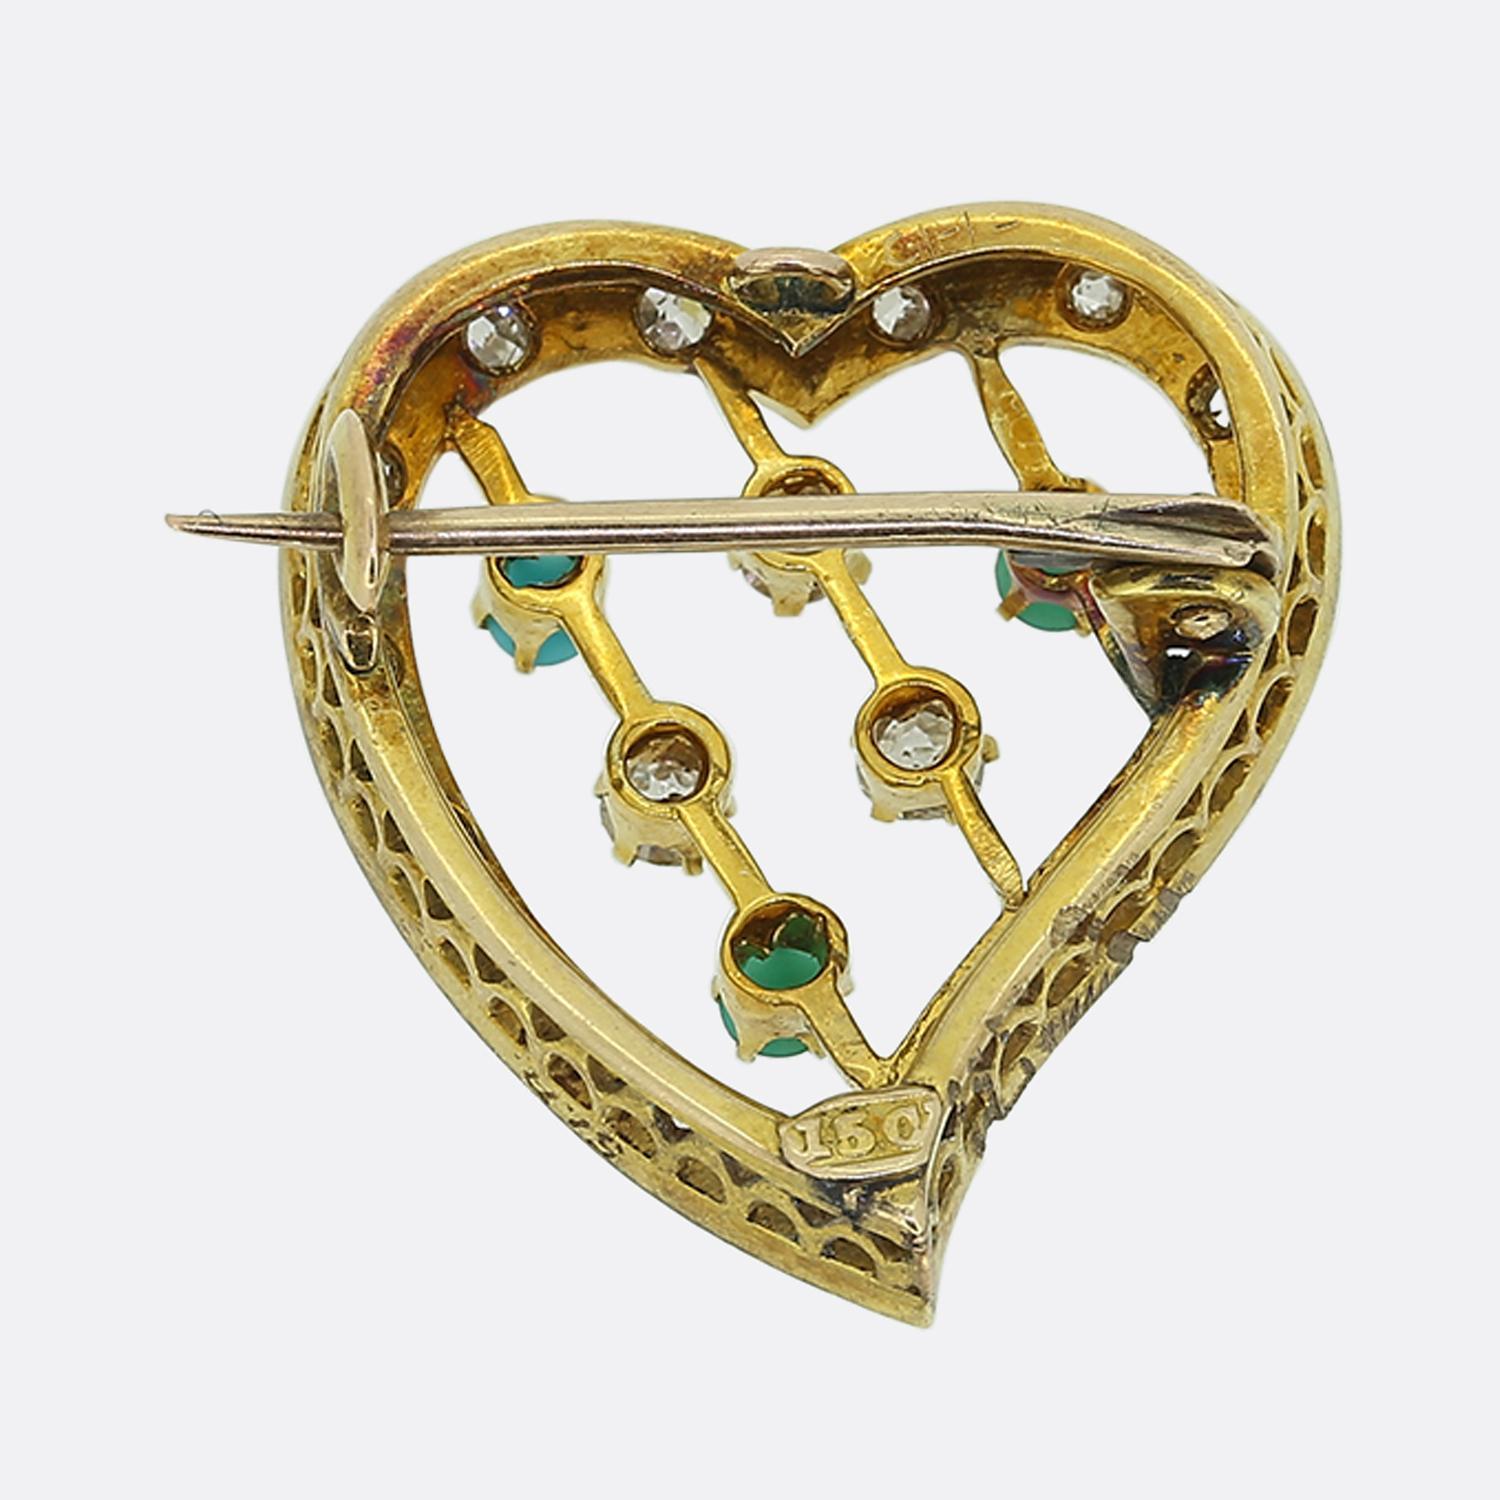 Here we have a delightful antique brooch dating back to the Victorian period. This romantic piece has been crafted from 15ct yellow gold into the shape an open love heart; the outer edge of which plays host to an alternating array of round faceted